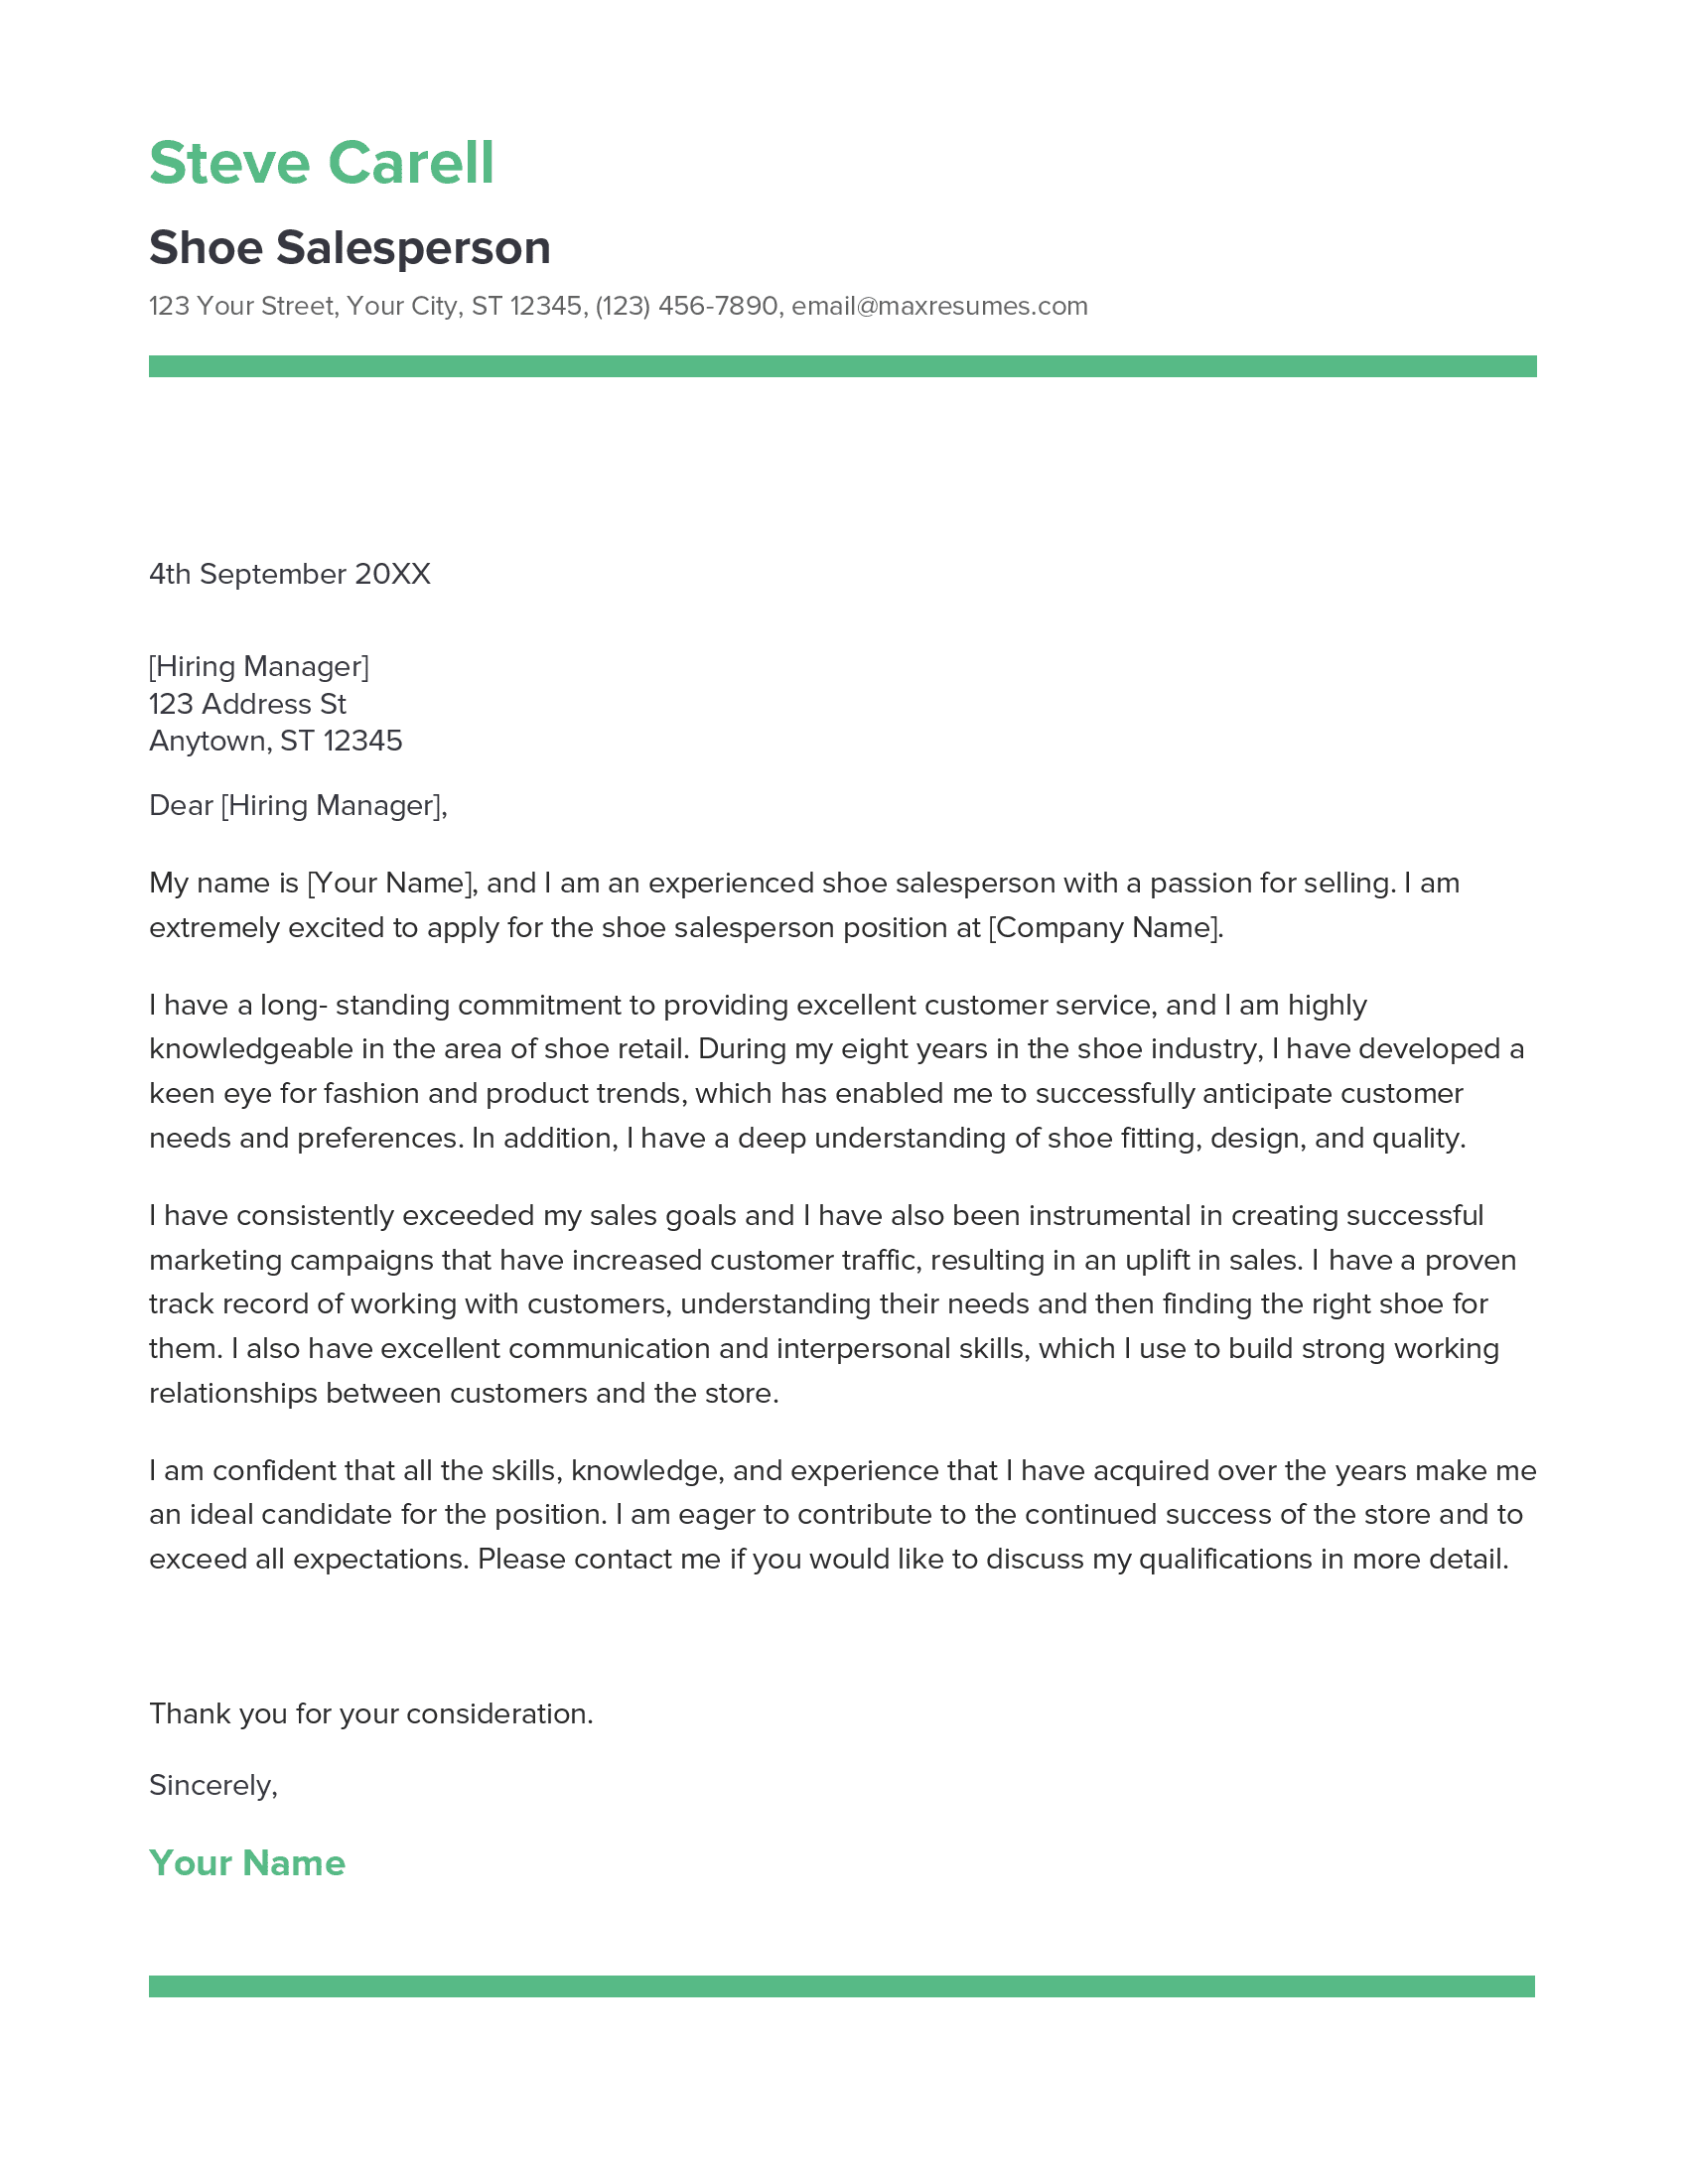 Shoe Salesperson Cover Letter Example